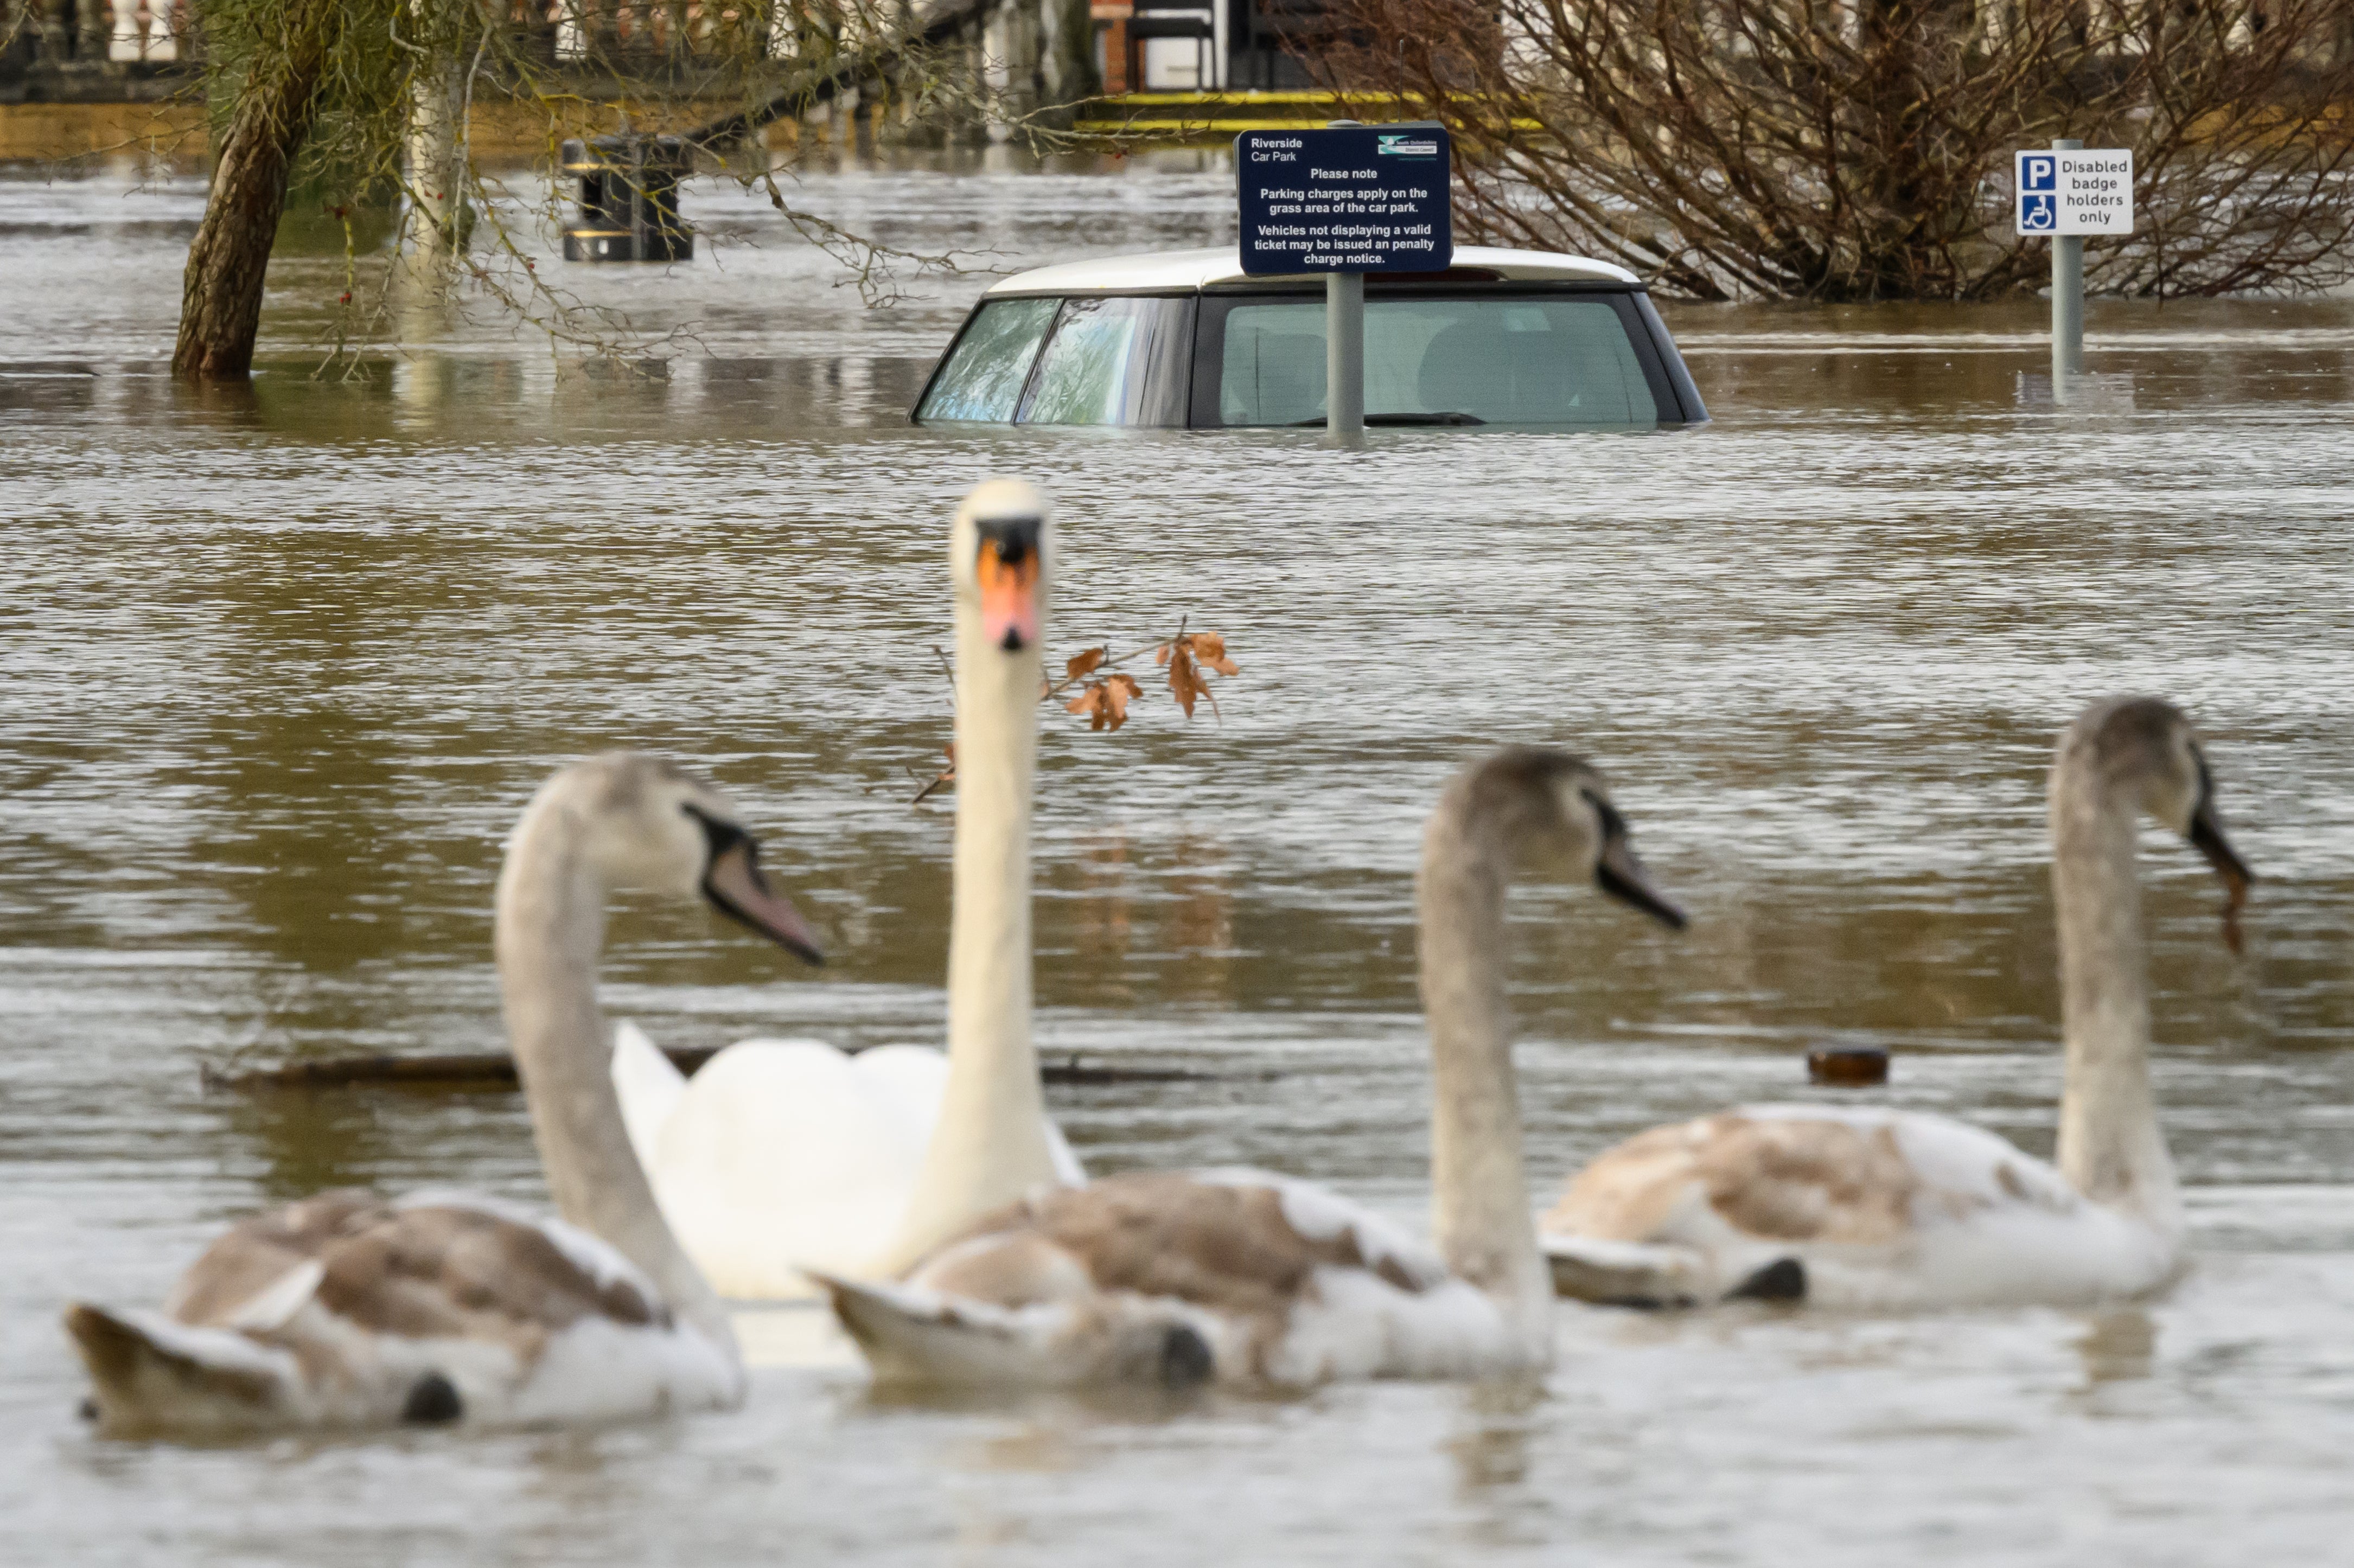 File image: Swans swim past a submerged car in a car park in January in Wallingford, United Kingdom. More rain is set to fall on saturated grounds this week prompting flooding concerns